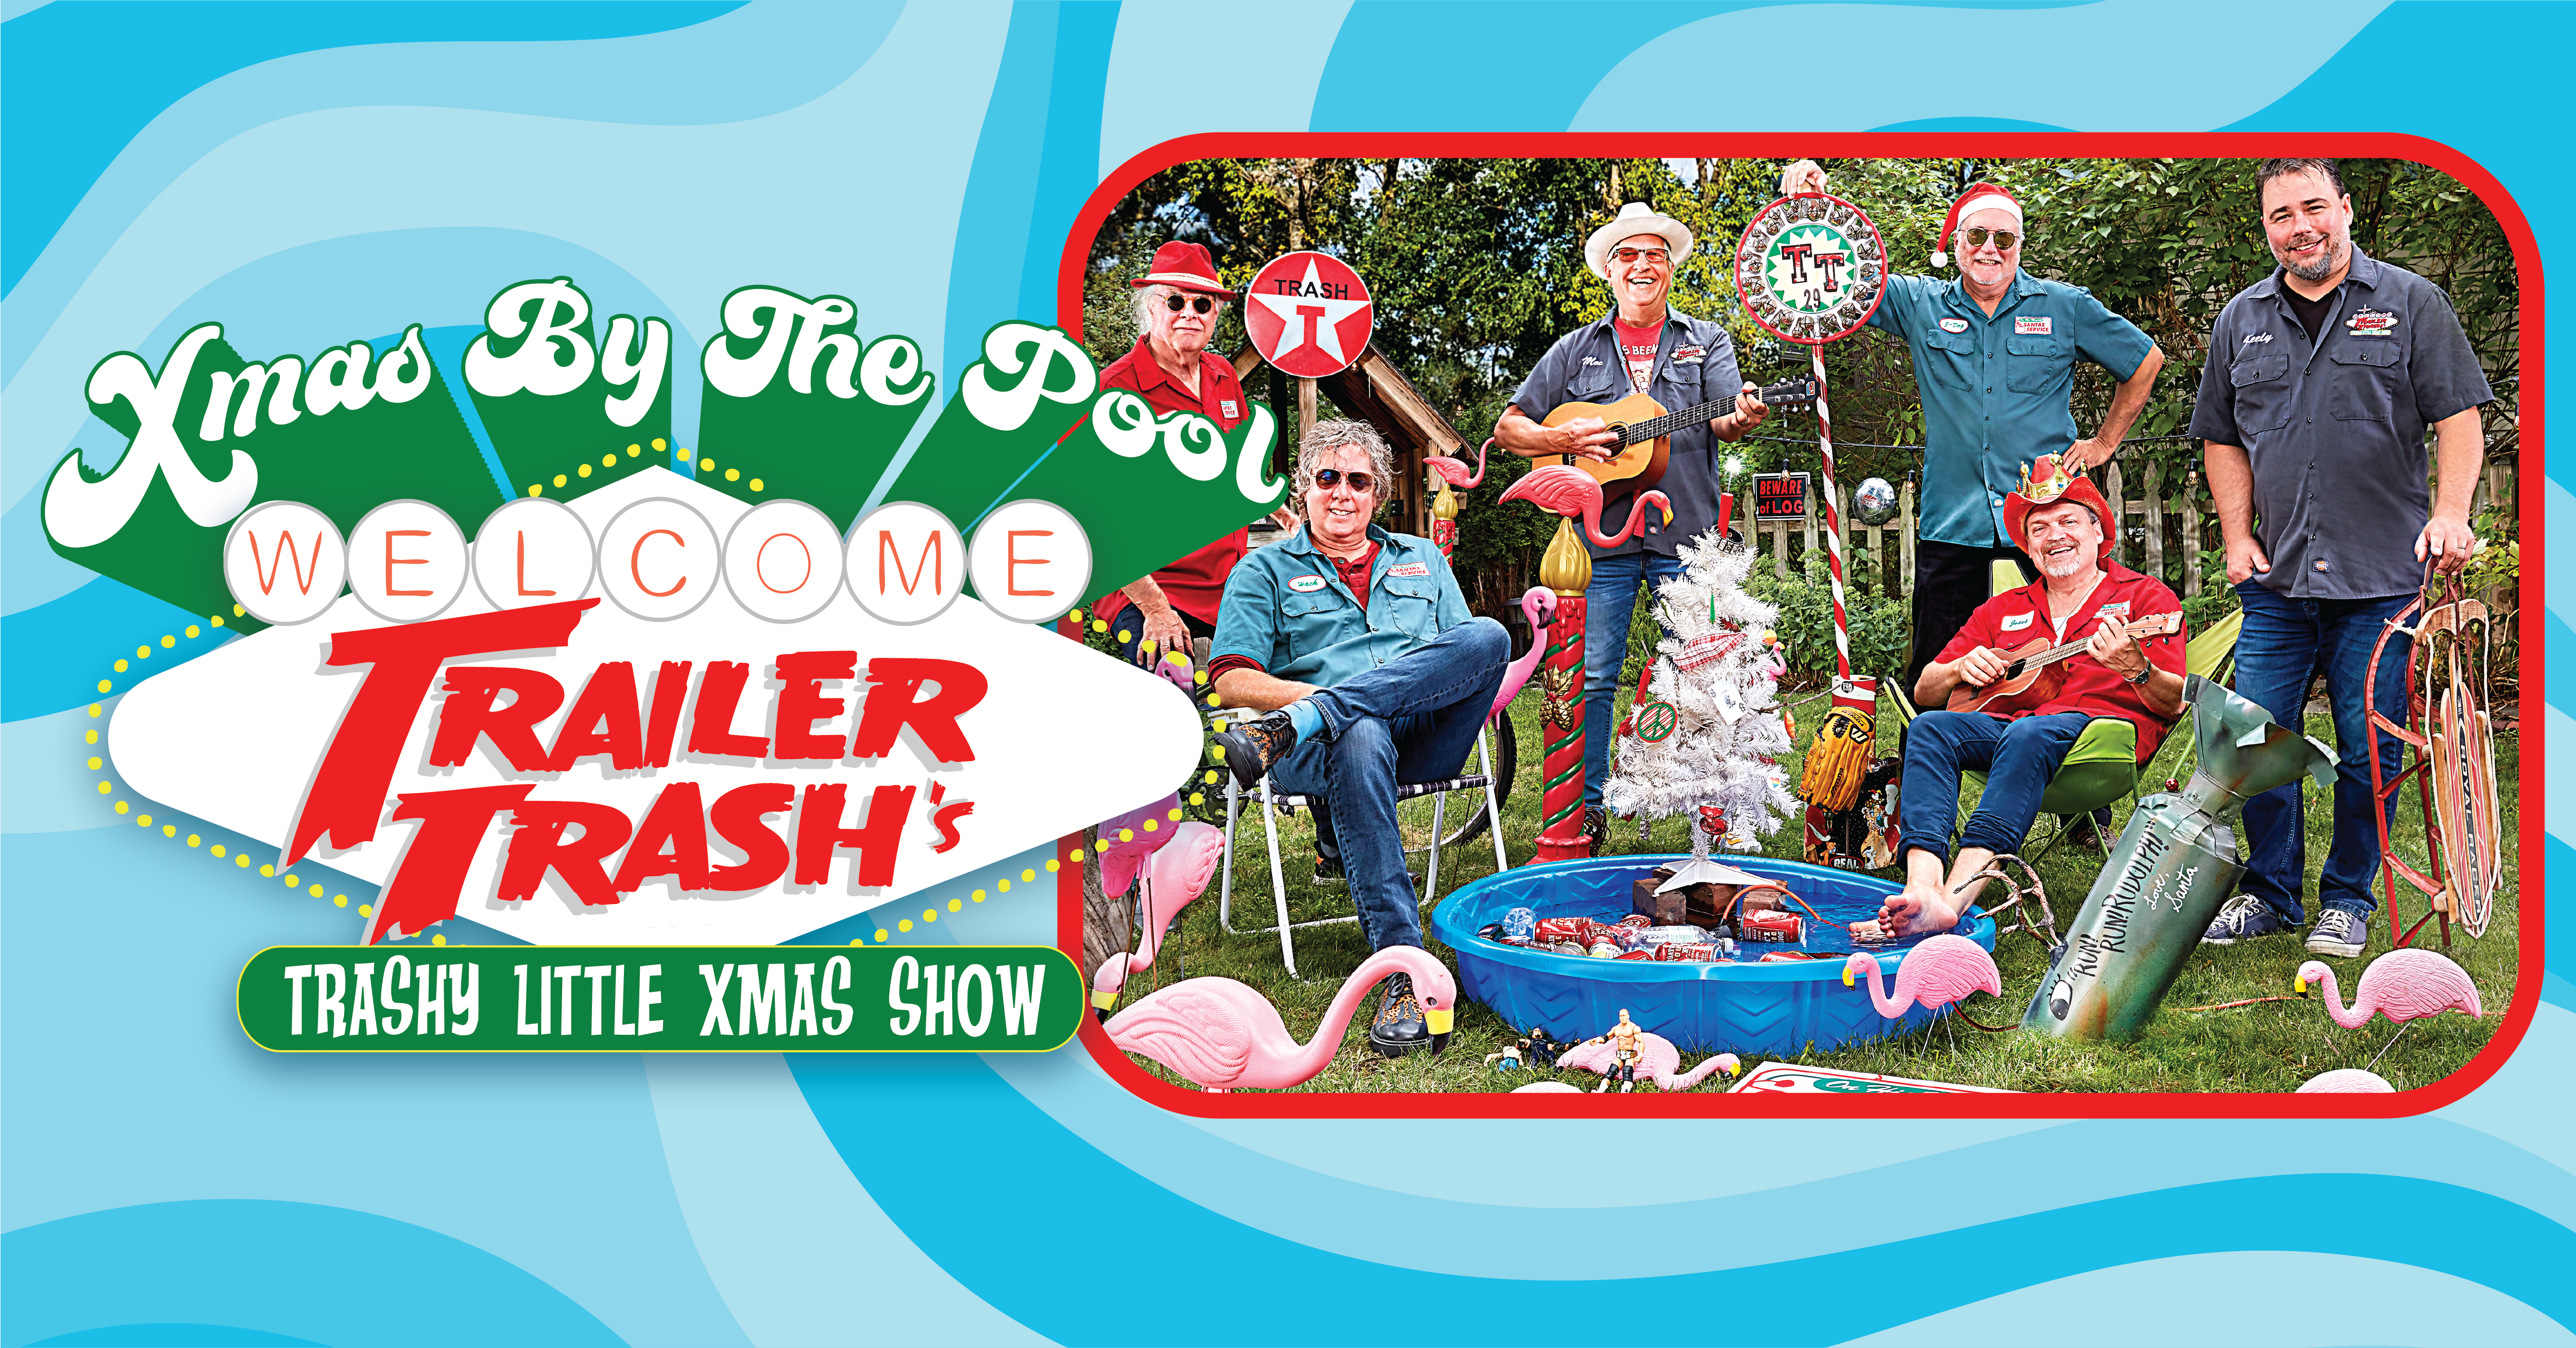 Trailer Trash's Trashy Little Xmas Show “Xmas By The Pool” Friday, December 9, 2021 Doors 6:00pm :: Music 7:00pm :: 21+ Tickets: $25 * Does not include fees